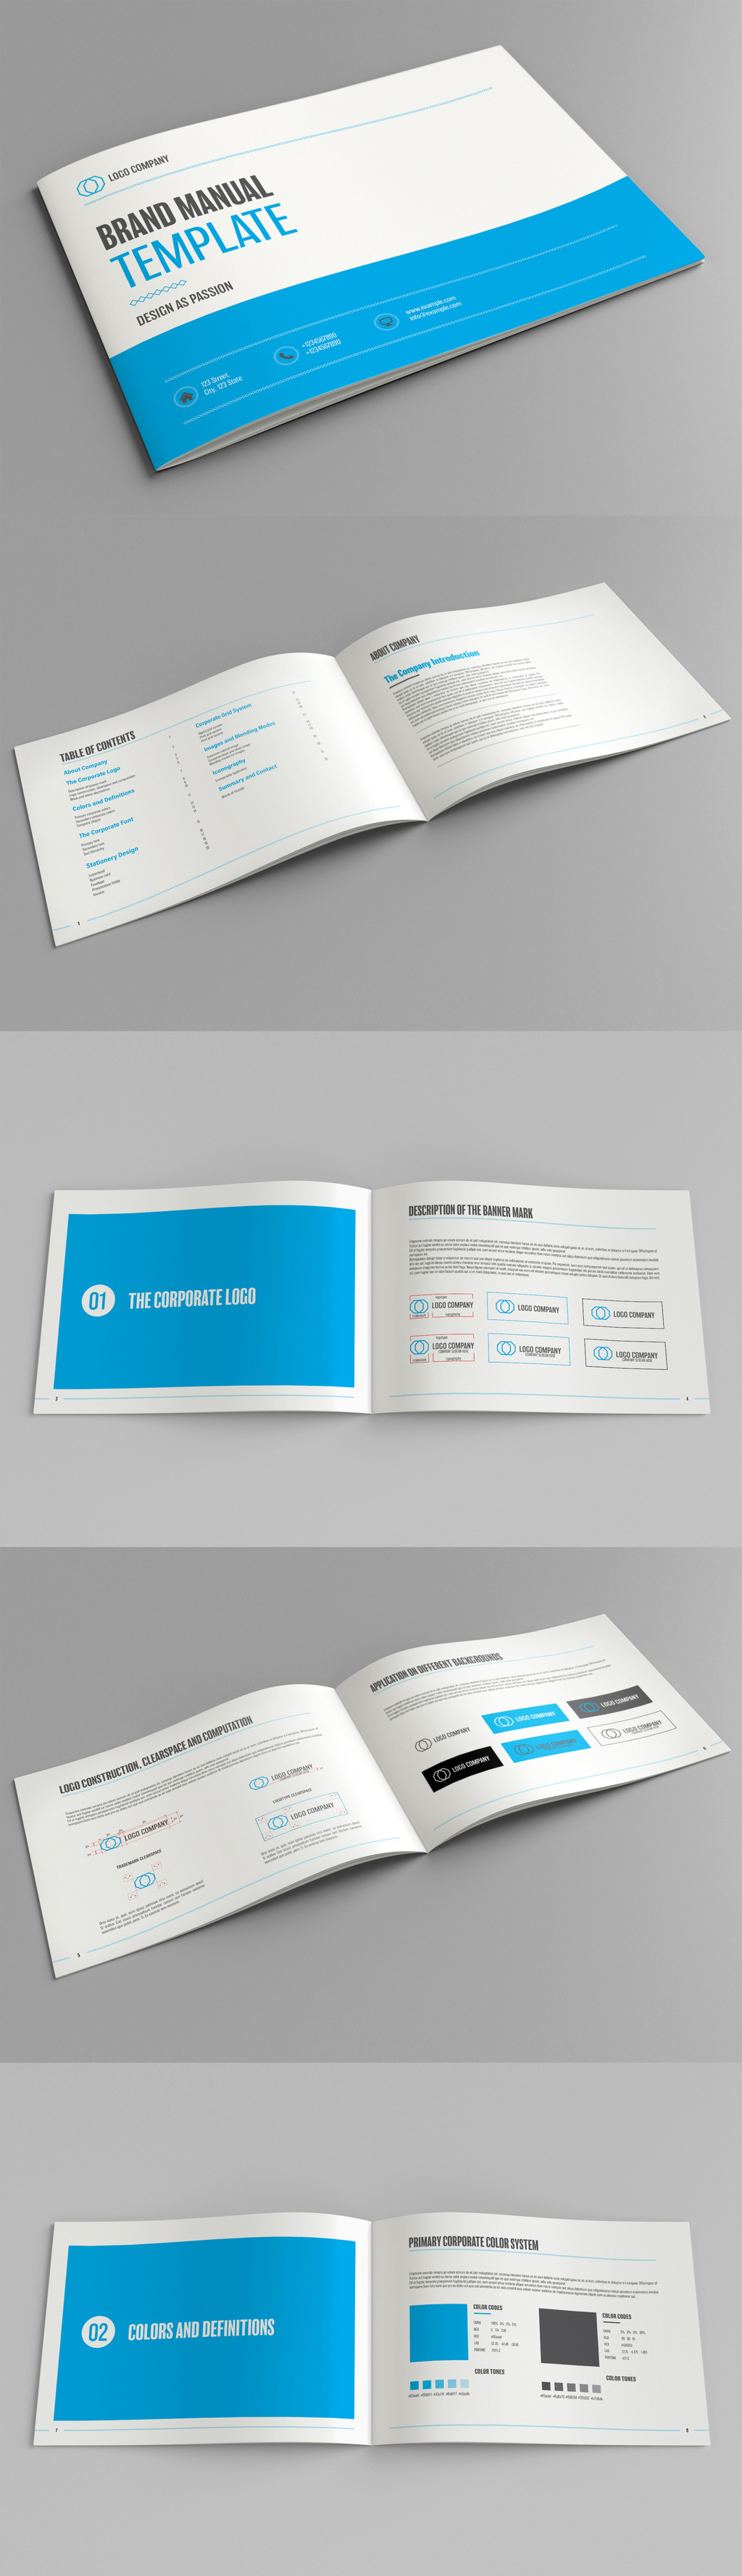 Brand manual template with blue accents from @GrkiCreative.